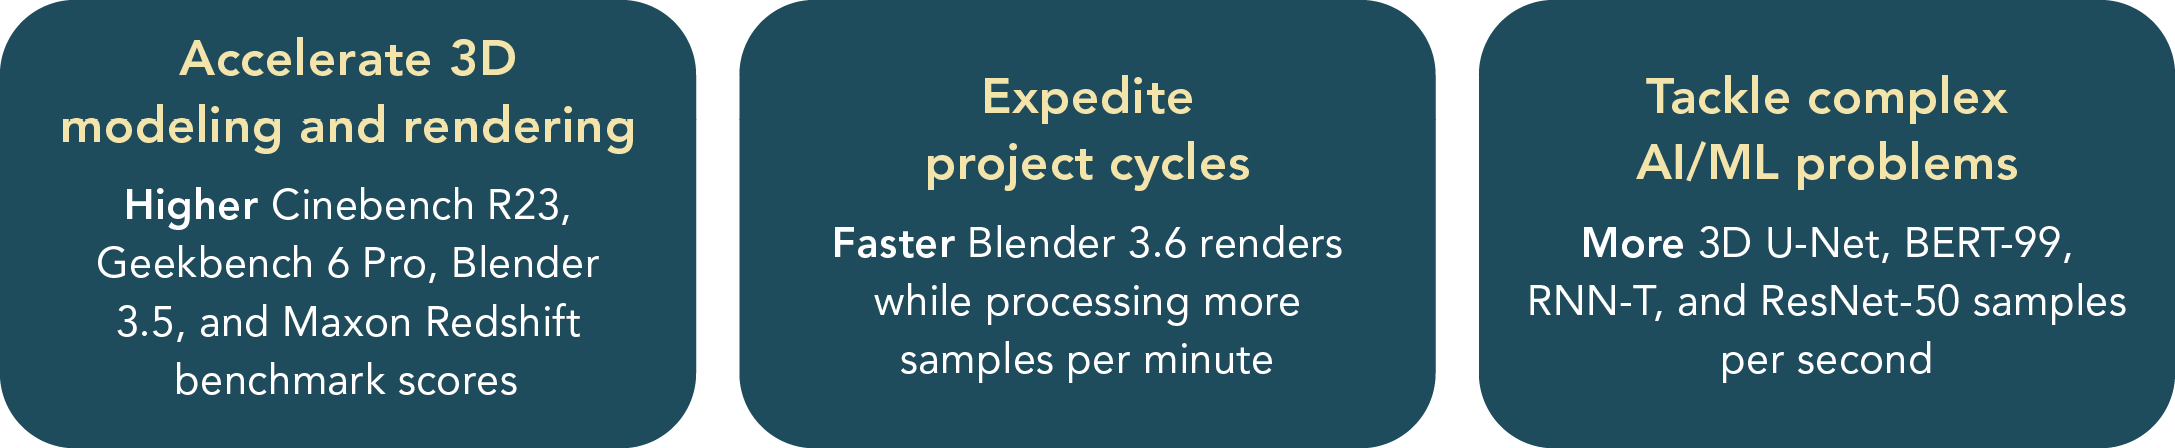 Accelerate 3D modeling and rendering. Higher Cinebench R23, Geekbench 6 Pro, Blender 3.5, and Mason Redshift benchmark scores. Expedite project cycles. Faster Blender 3.6 renders while processing more samples per minute. Tackle complex AI/ML problems. More 3D U-Net, Bert-99, RNN-T, and ResNet-50 samples per second.